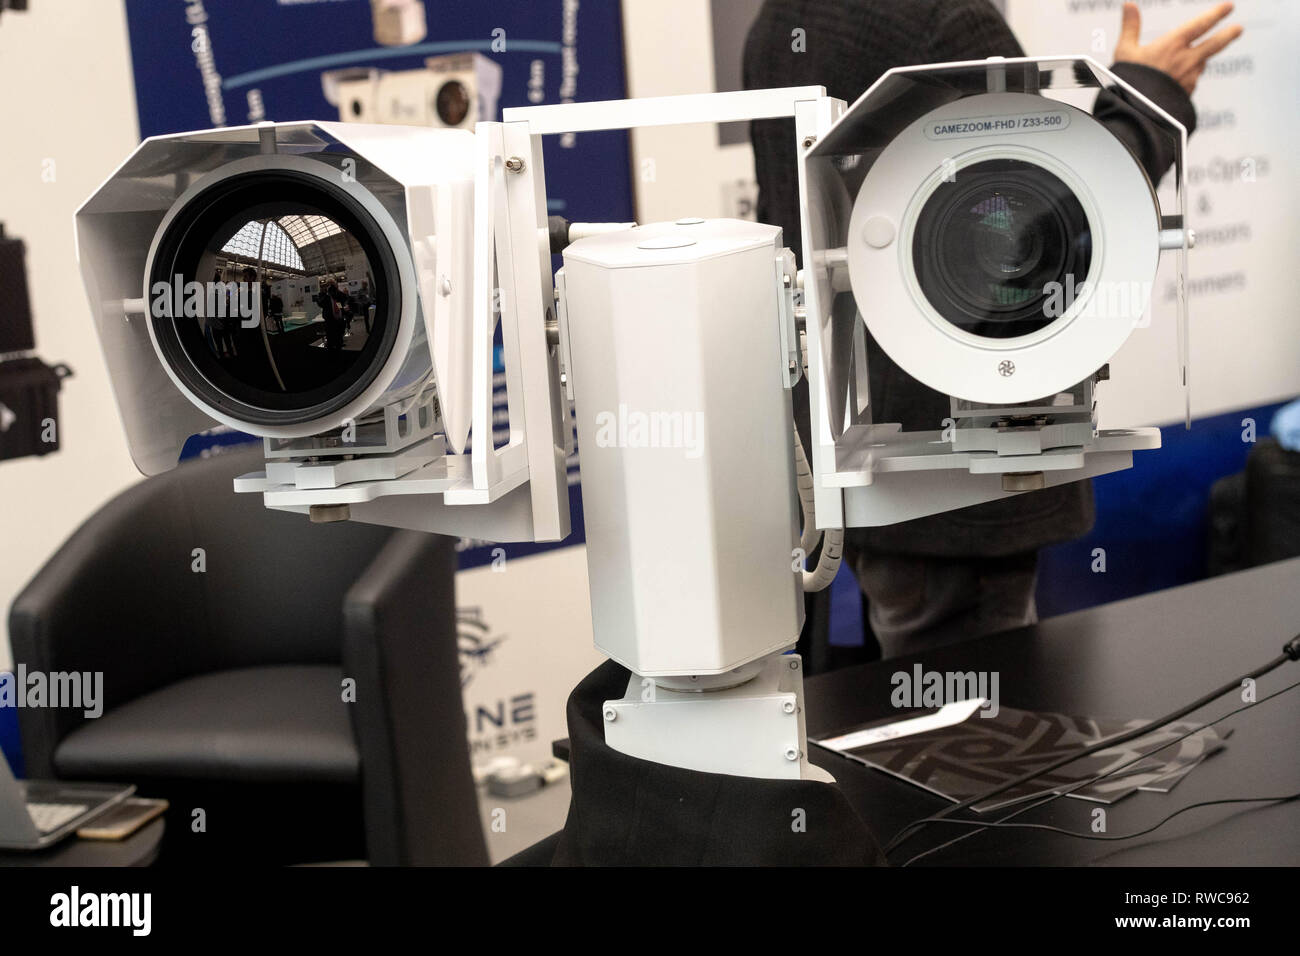 London 6th March 2019 Security and Counter Terror Expo 2019 at Olympia London Drone detection system Credit: Ian Davidson/Alamy Live News Stock Photo